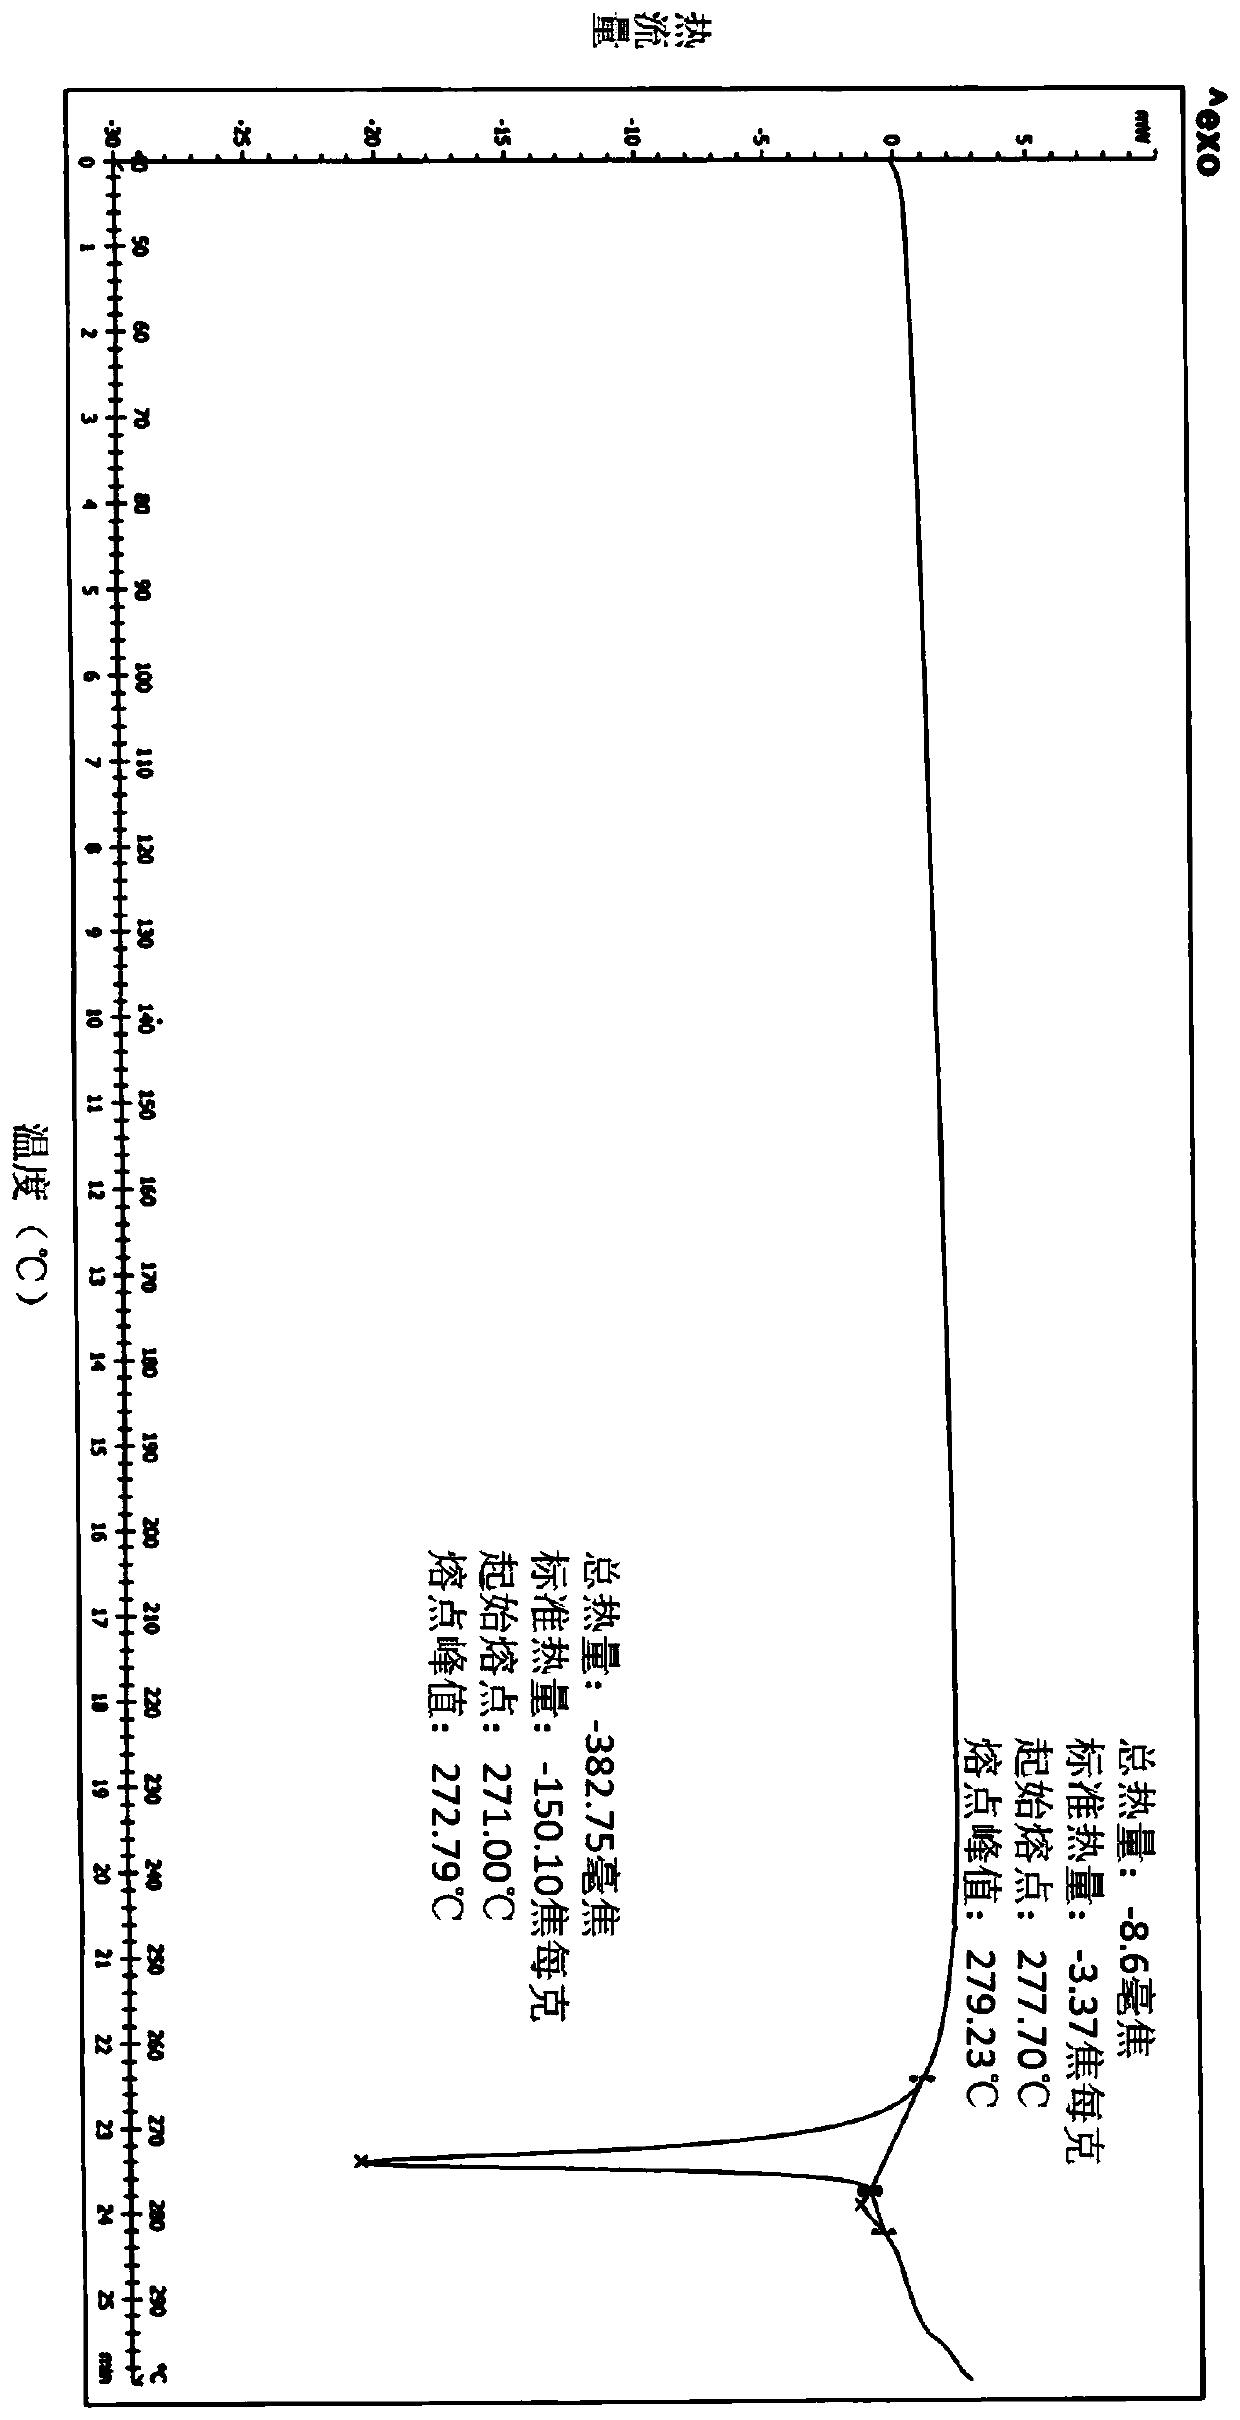 Method for preparing R-ketamine and pharmaceutically acceptable salt thereof